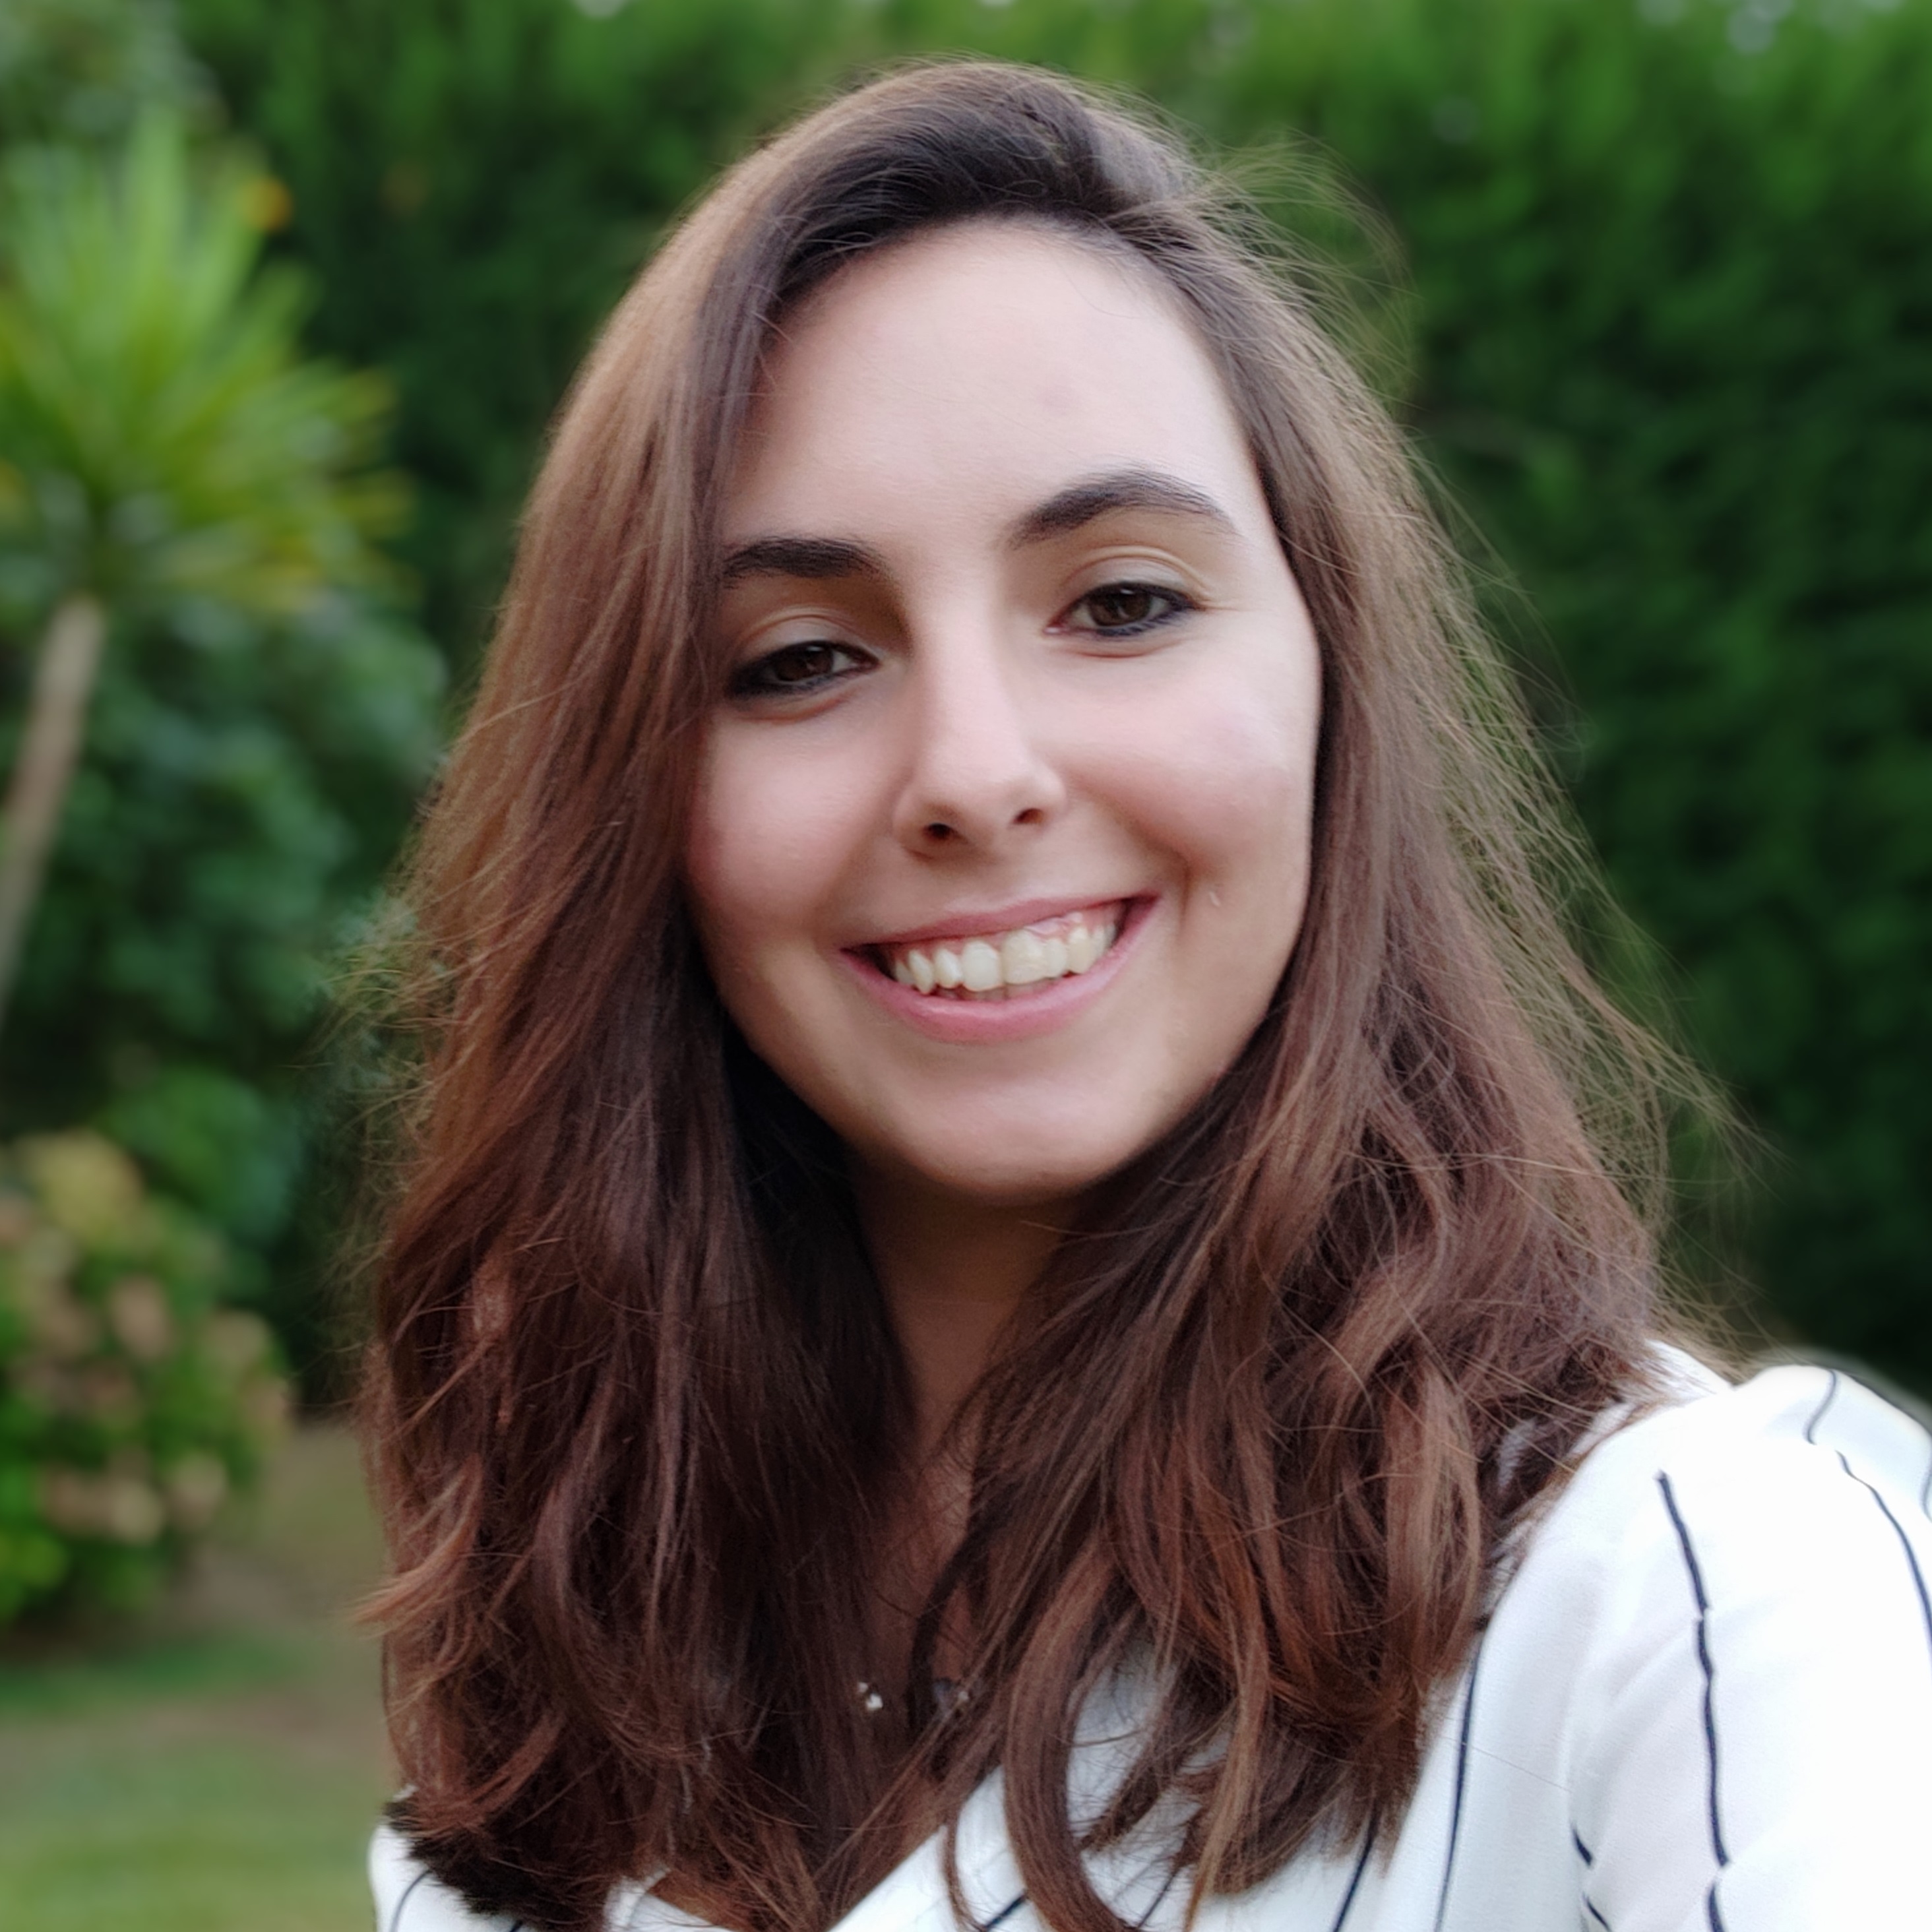 Joana Cardoso-Fernandes has completed the Ph.D. in Geosciences in 2021 by Faculdade de
Ciências da Universidade do Porto and Universidade de Aveiro, the Master's degree in Geology
in 2018 by Faculdade de Ciências da Universidade do Porto and the Bachelor's degree in
Geology in 2016 by Faculdade de Ciências da Universidade do Porto. She works in the area of
Natural sciences, namely on Earth and Environmental Sciences with emphasis on Geology. In
her curriculum, the most frequent terms in the context of scientific output are: Reflectance
spectroscopy; Spectrometer; Geological exploration; Remote sensing; Pegmatite; Lithium. She
also has experience in Python programming and machine learning applications; Petrography;
Geochemistry applied to mineral exploration (including stream sediment analysis); and
fieldwork related to pegmatite exploration.